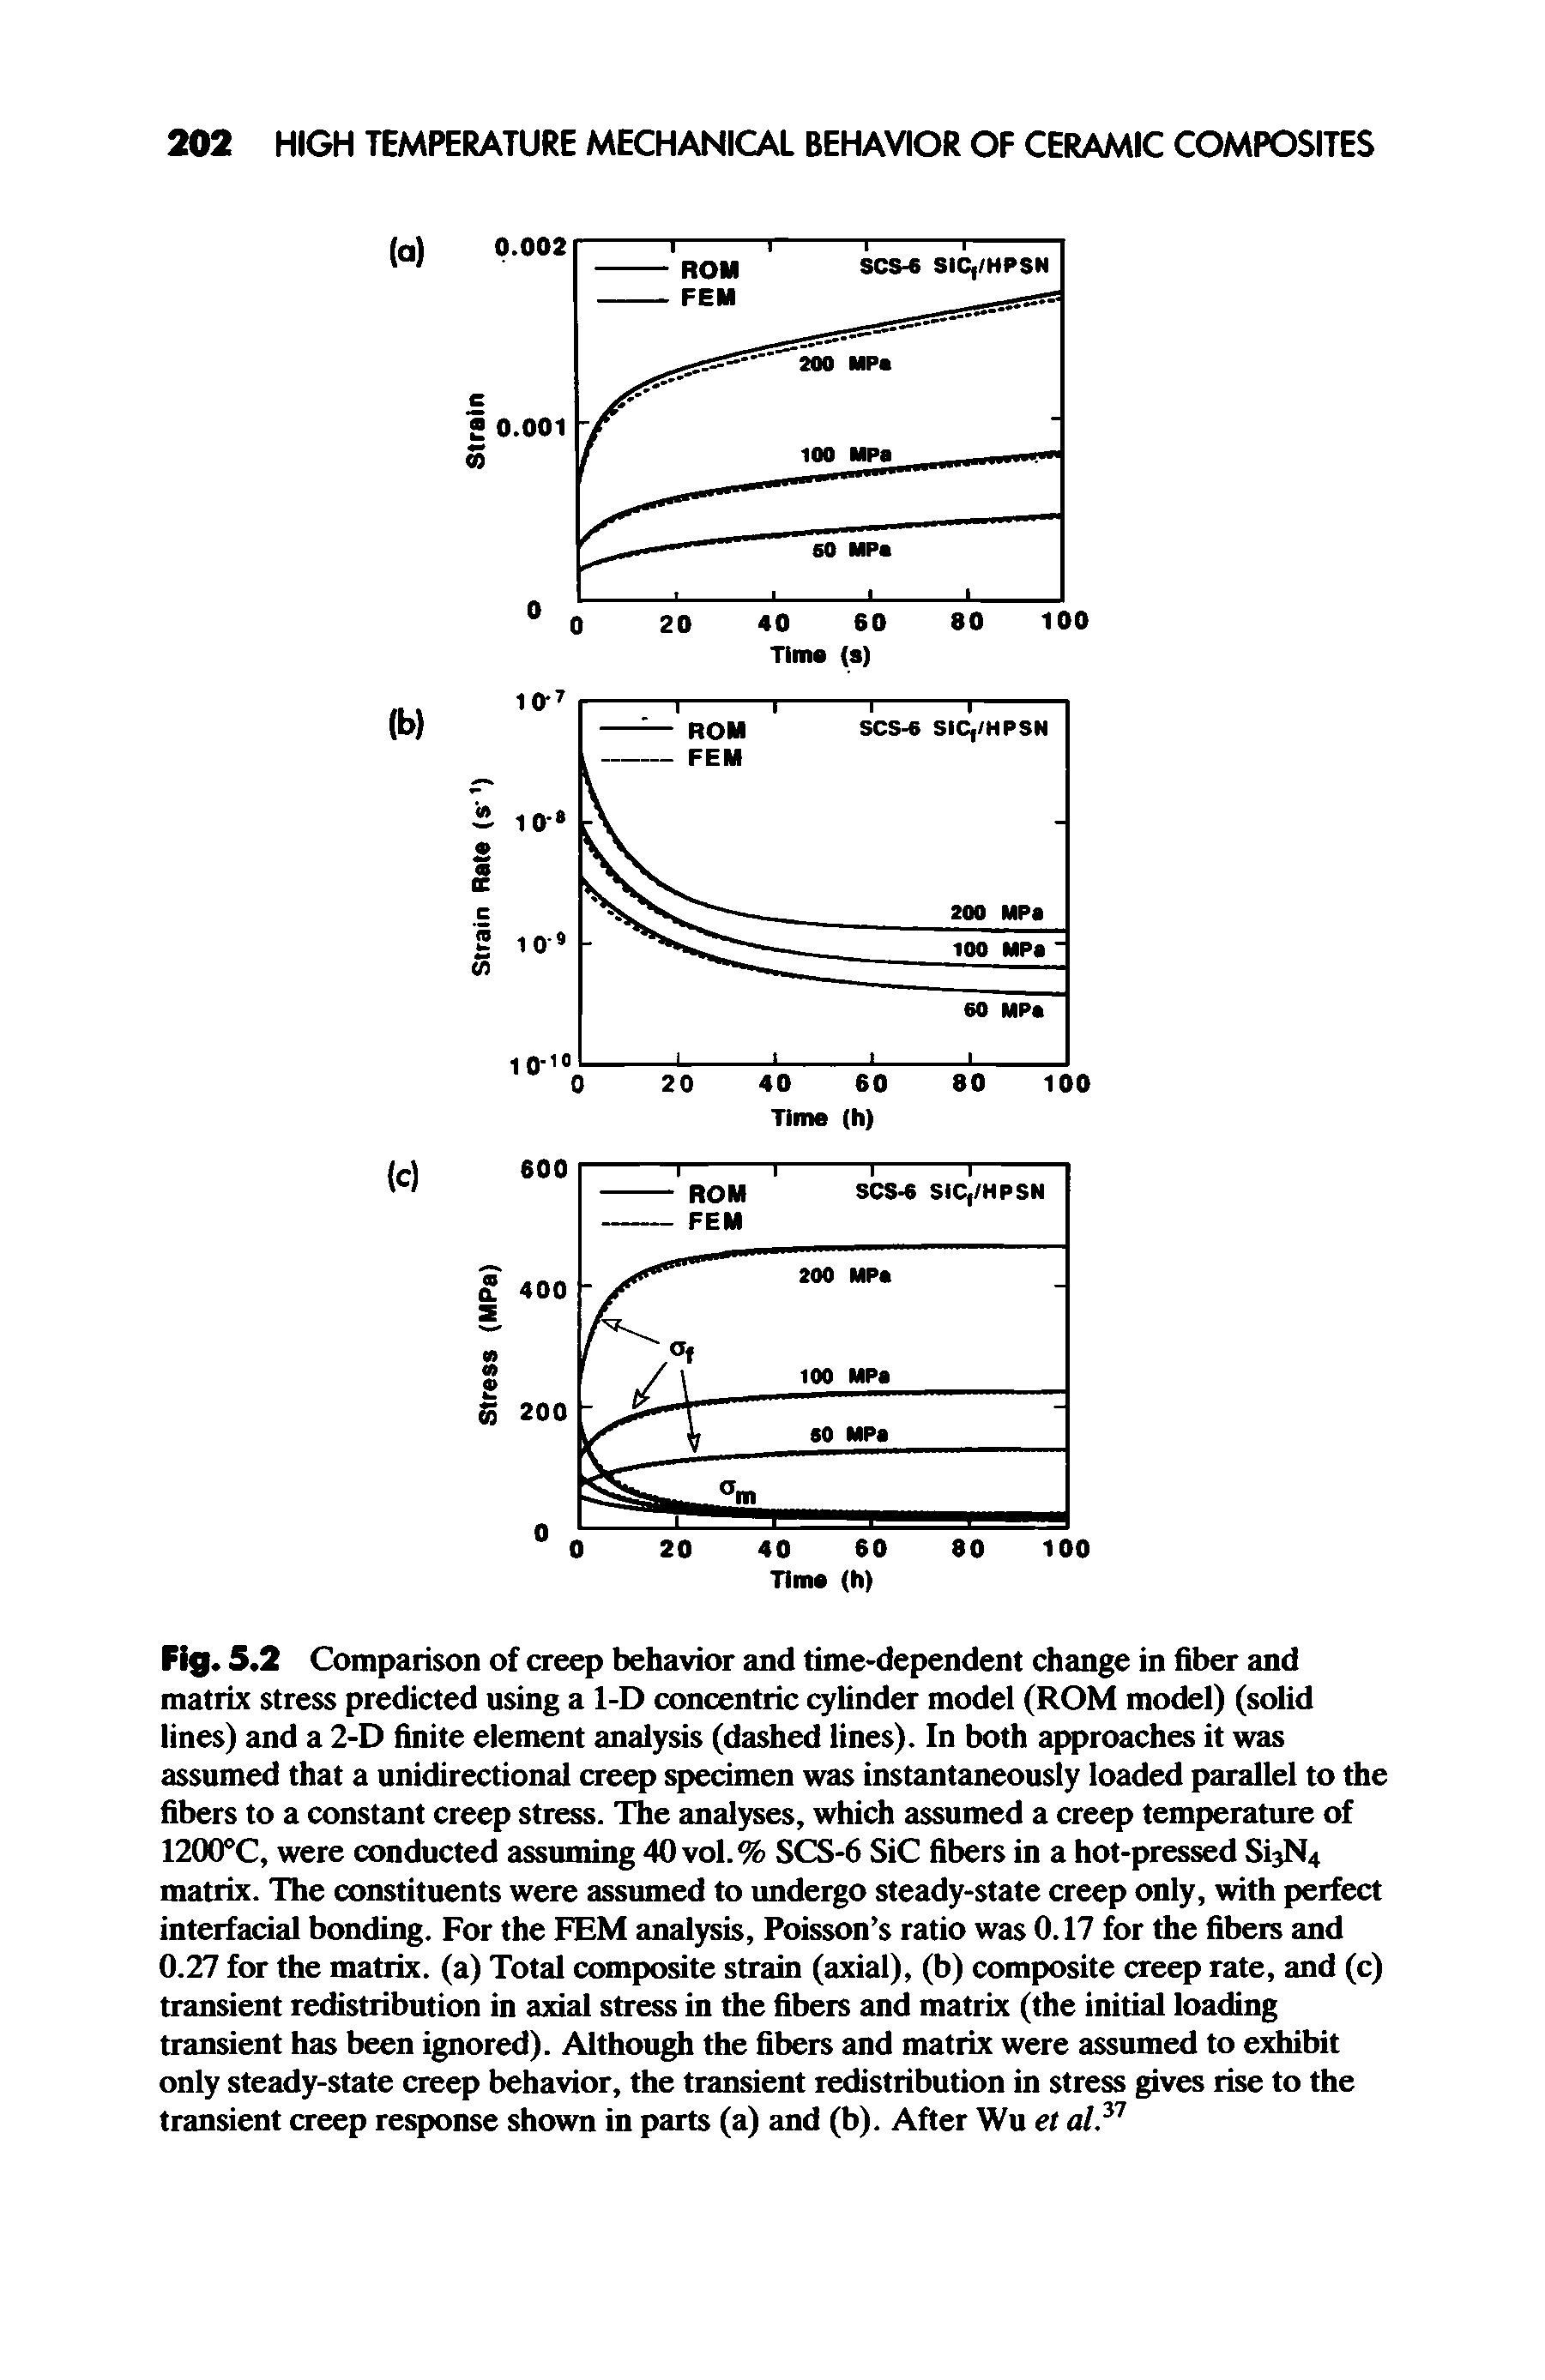 Fig. 5.2 Comparison of creep behavior and time-dependent change in fiber and matrix stress predicted using a 1-D concentric cylinder model (ROM model) (solid lines) and a 2-D finite element analysis (dashed lines). In both approaches it was assumed that a unidirectional creep specimen was instantaneously loaded parallel to the fibers to a constant creep stress. The analyses, which assumed a creep temperature of 1200°C, were conducted assuming 40 vol.% SCS-6 SiC fibers in a hot-pressed SijN4 matrix. The constituents were assumed to undergo steady-state creep only, with perfect interfacial bonding. For the FEM analysis, Poisson s ratio was 0.17 for the fibers and 0.27 for the matrix, (a) Total composite strain (axial), (b) composite creep rate, and (c) transient redistribution in axial stress in the fibers and matrix (the initial loading transient has been ignored). Although the fibers and matrix were assumed to exhibit only steady-state creep behavior, the transient redistribution in stress gives rise to the transient creep response shown in parts (a) and (b). After Wu et al 1...